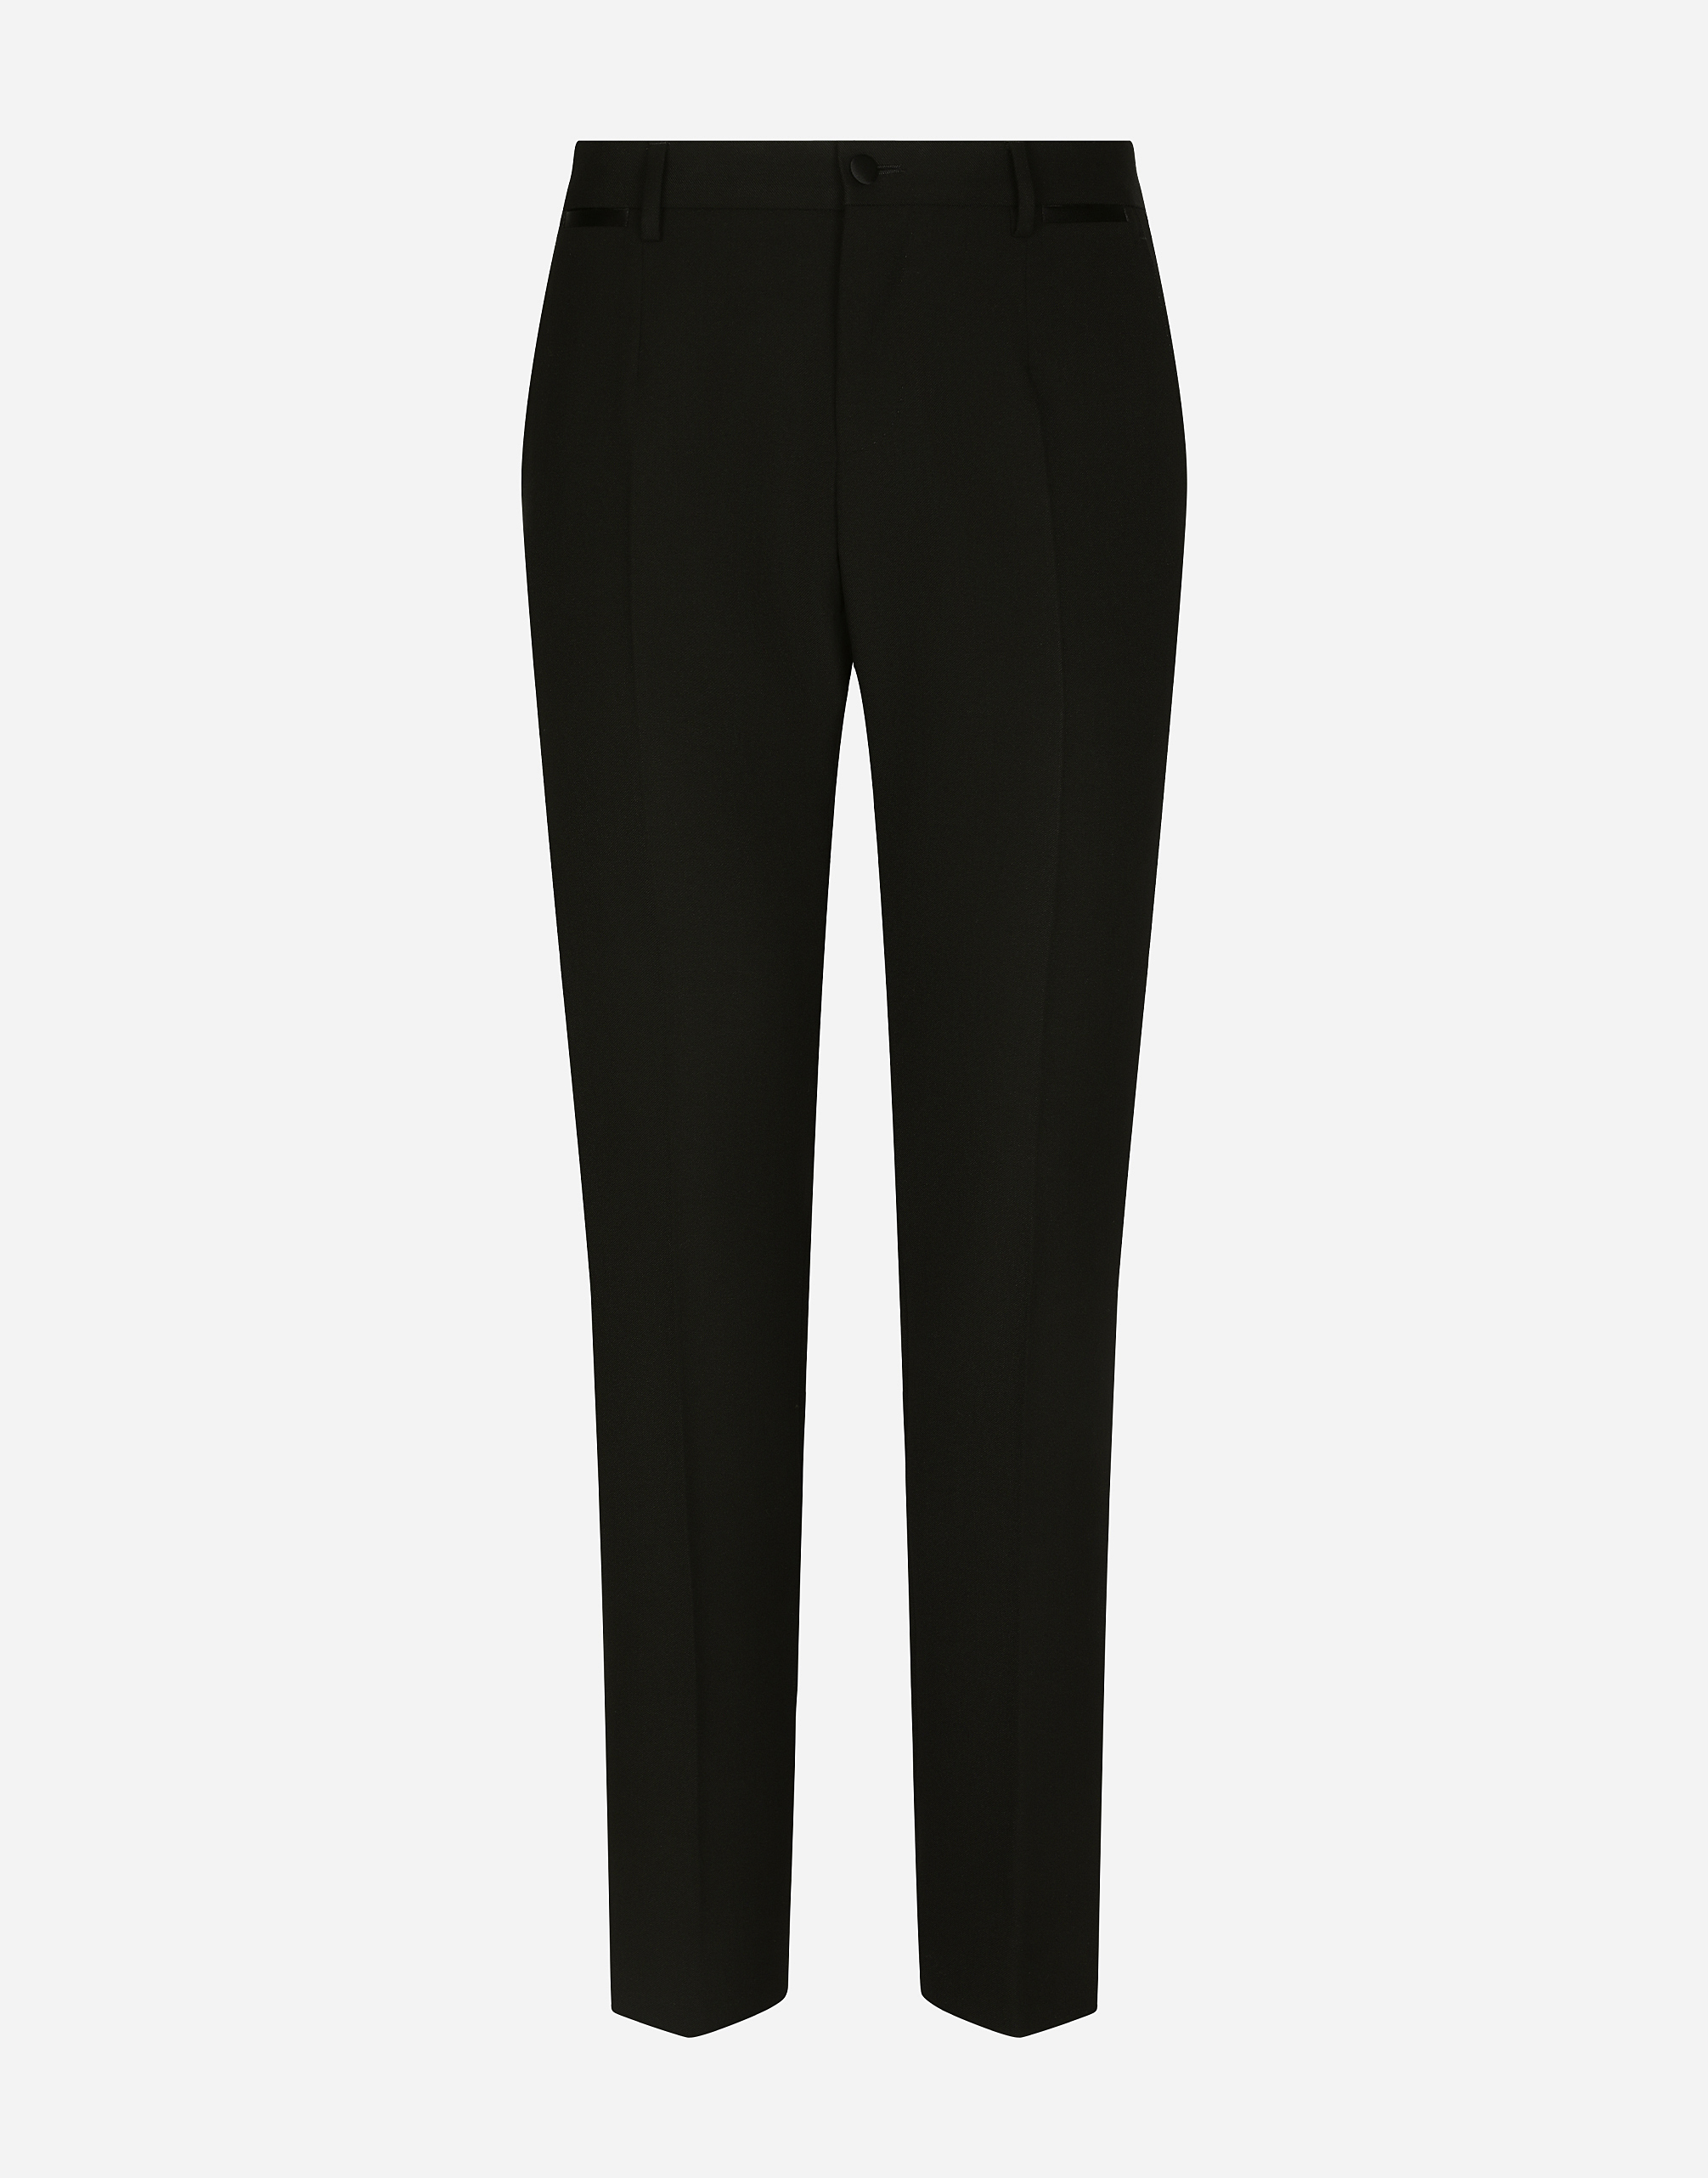 Tailored stretch wool tuxedo pants in Black